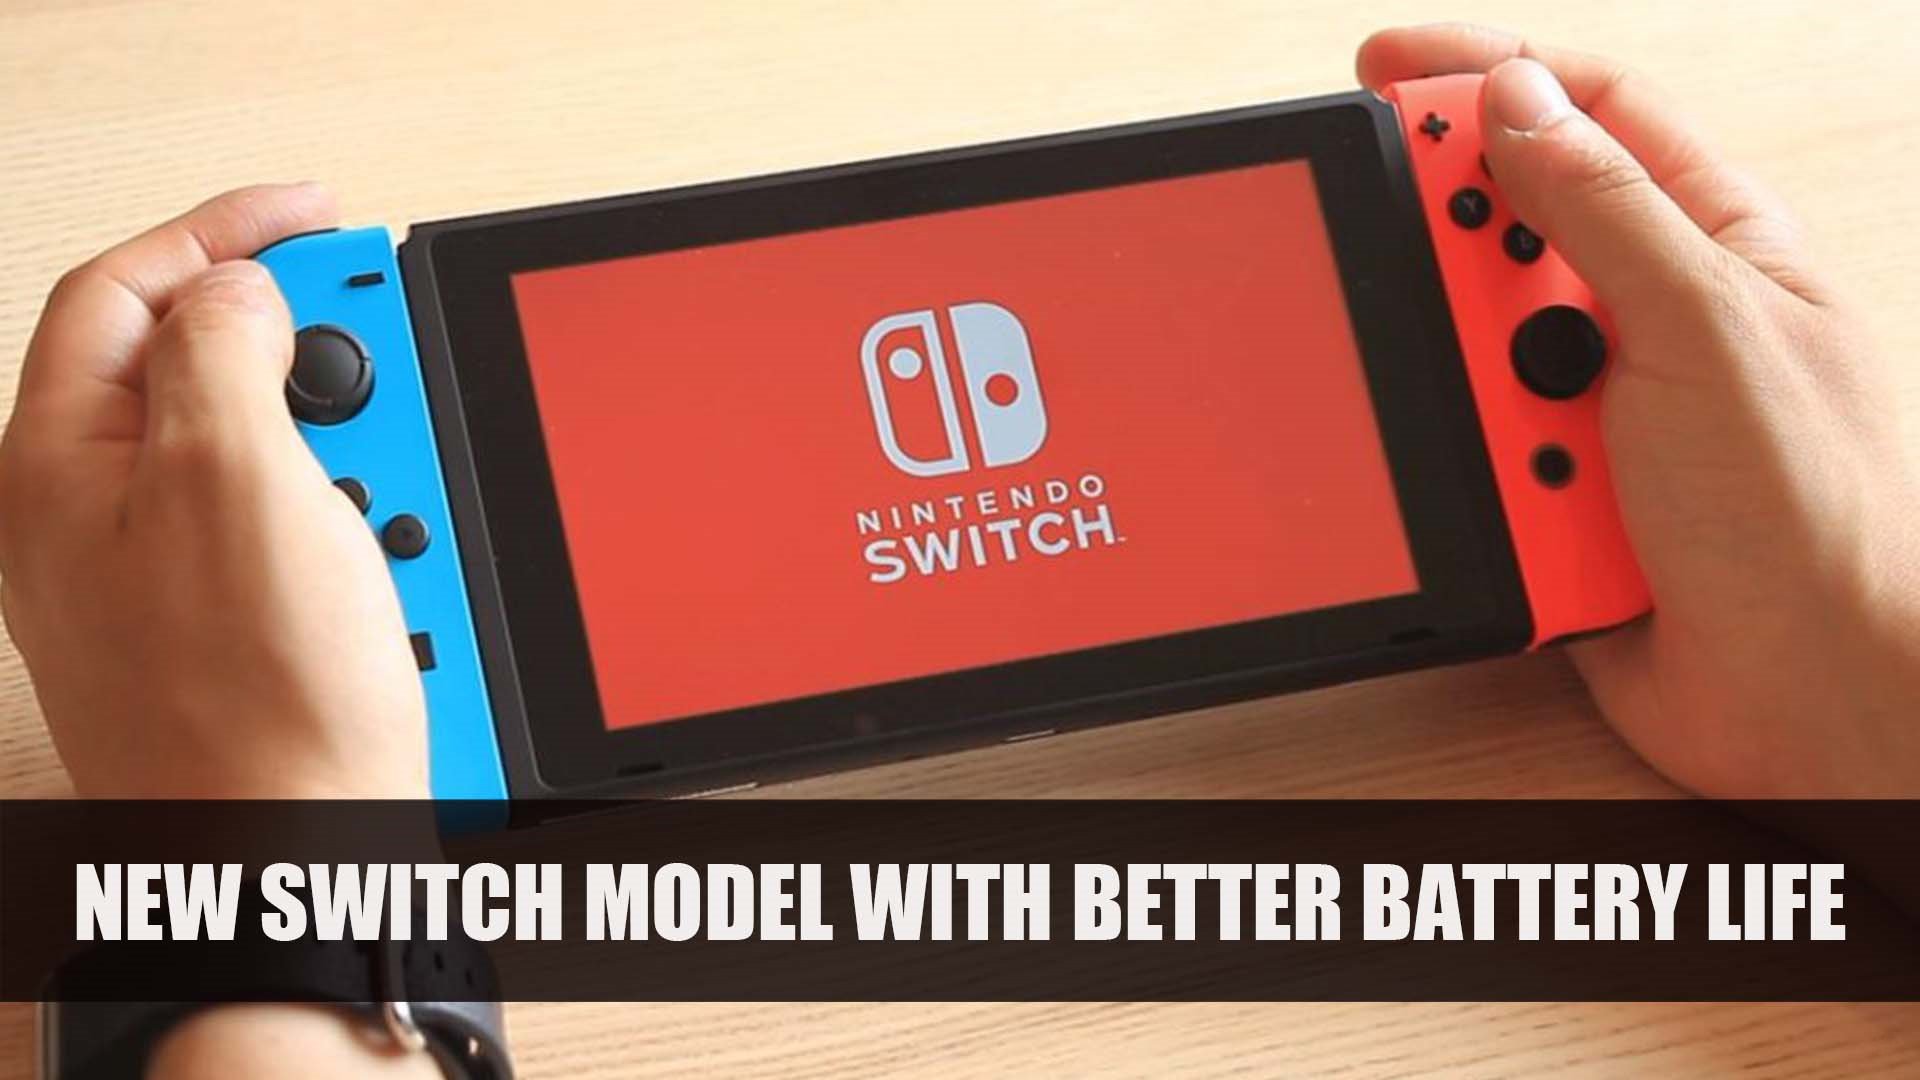 Nintendo Announces New Switch Model With Better Battery Life